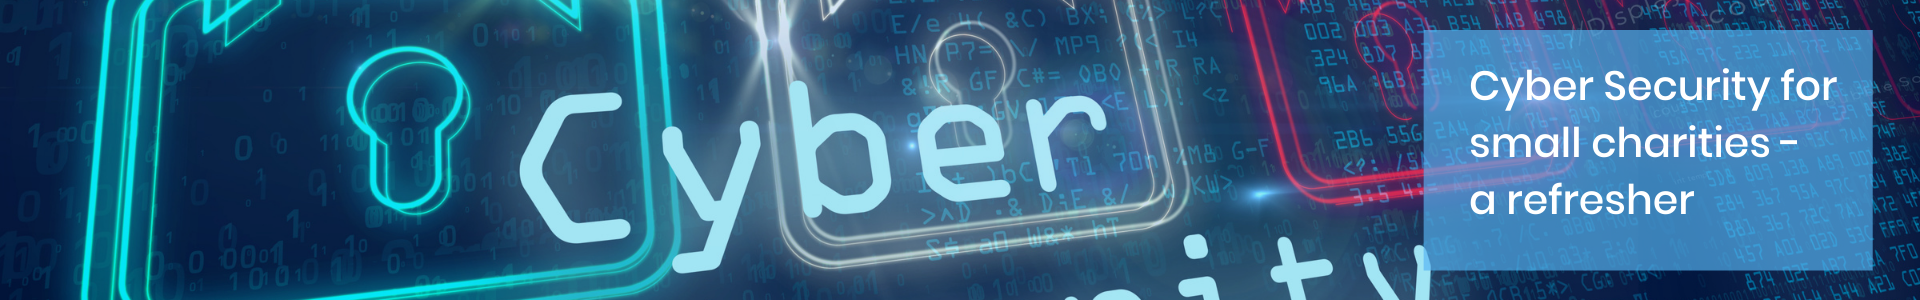 Image showing Cyber in neon with a padlock icon behind